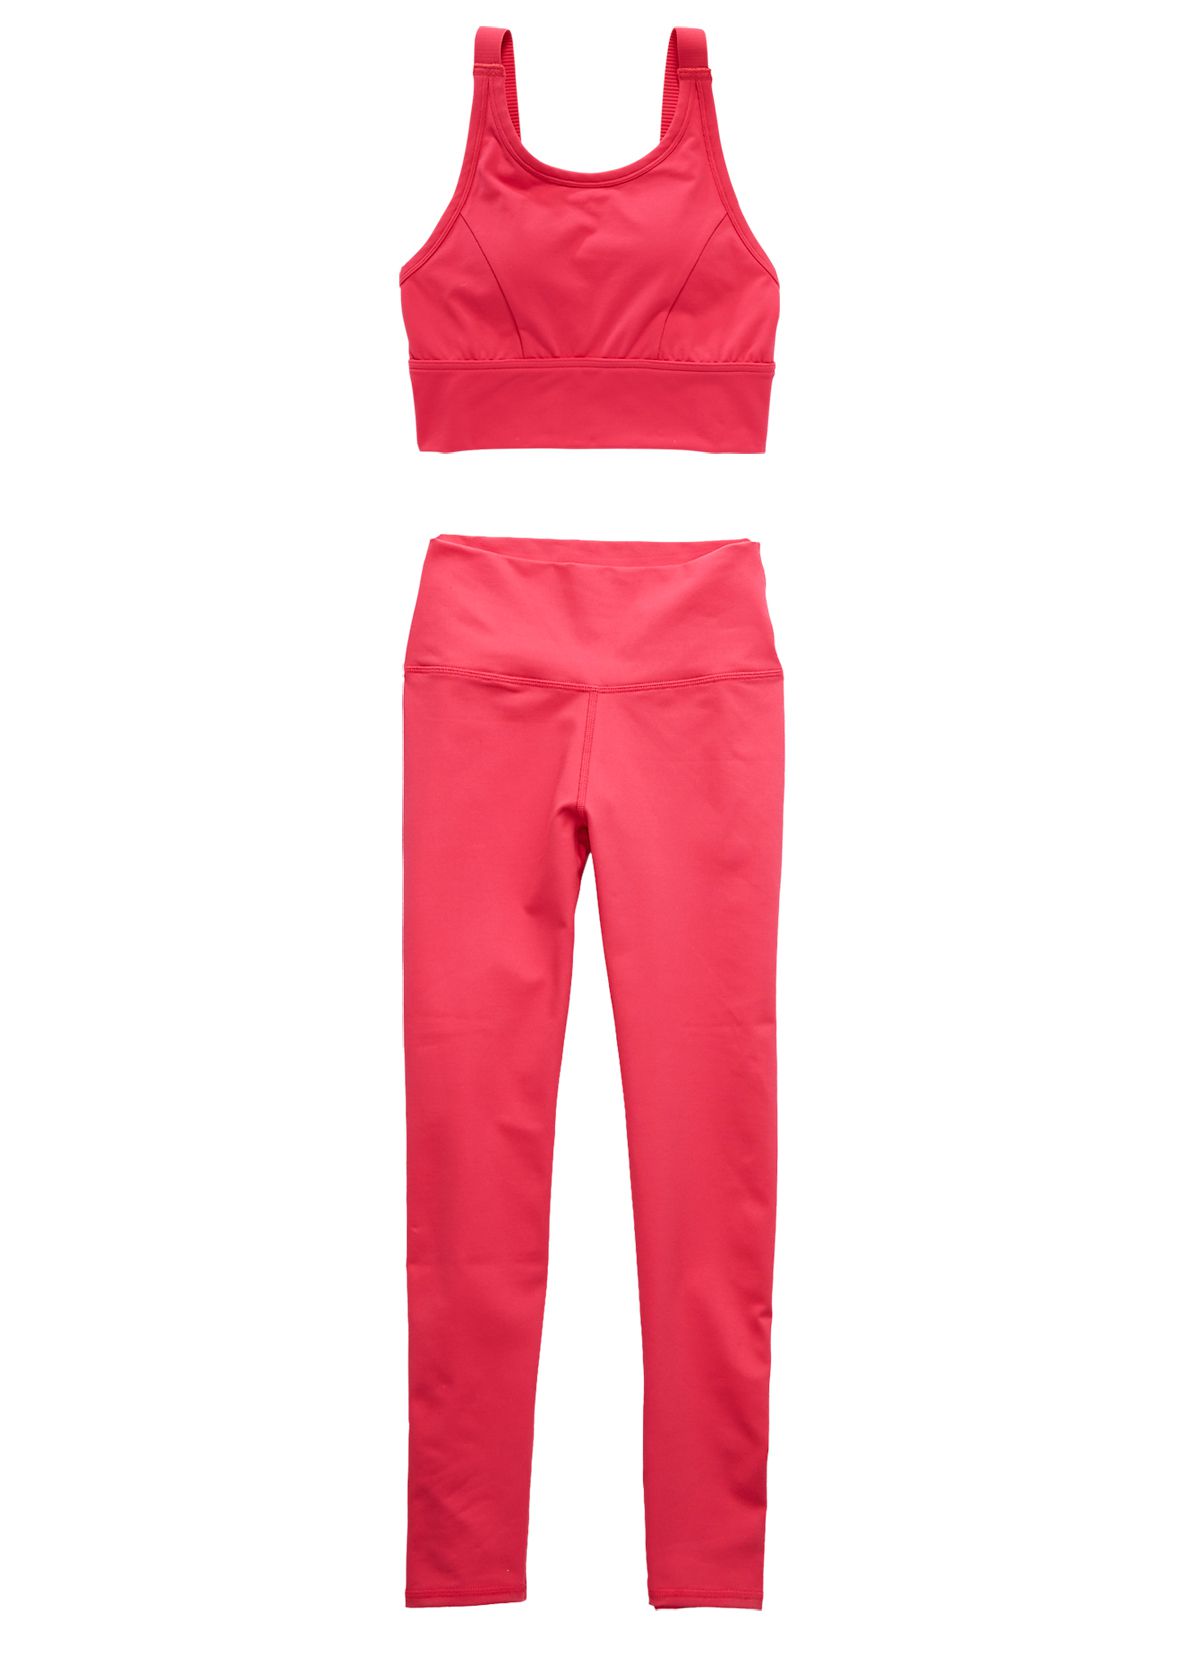 Aerie Bright Pink Sports Bra and Bright Pink High-Waisted Legging